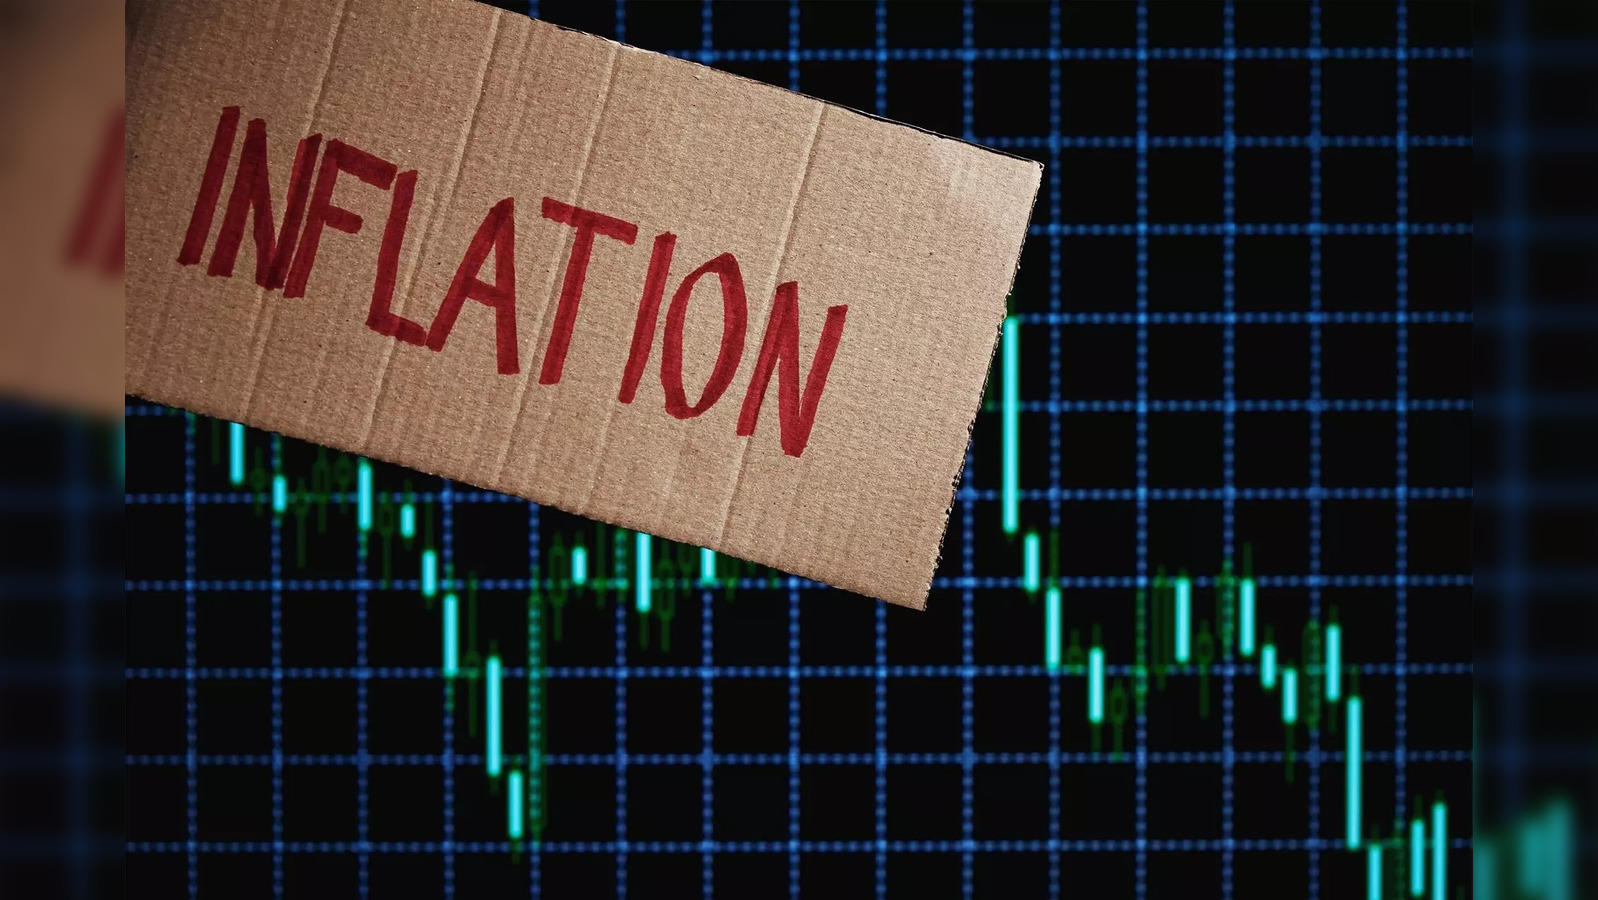 core: 'Core inflation may bottom out around 4%' - The Economic Times